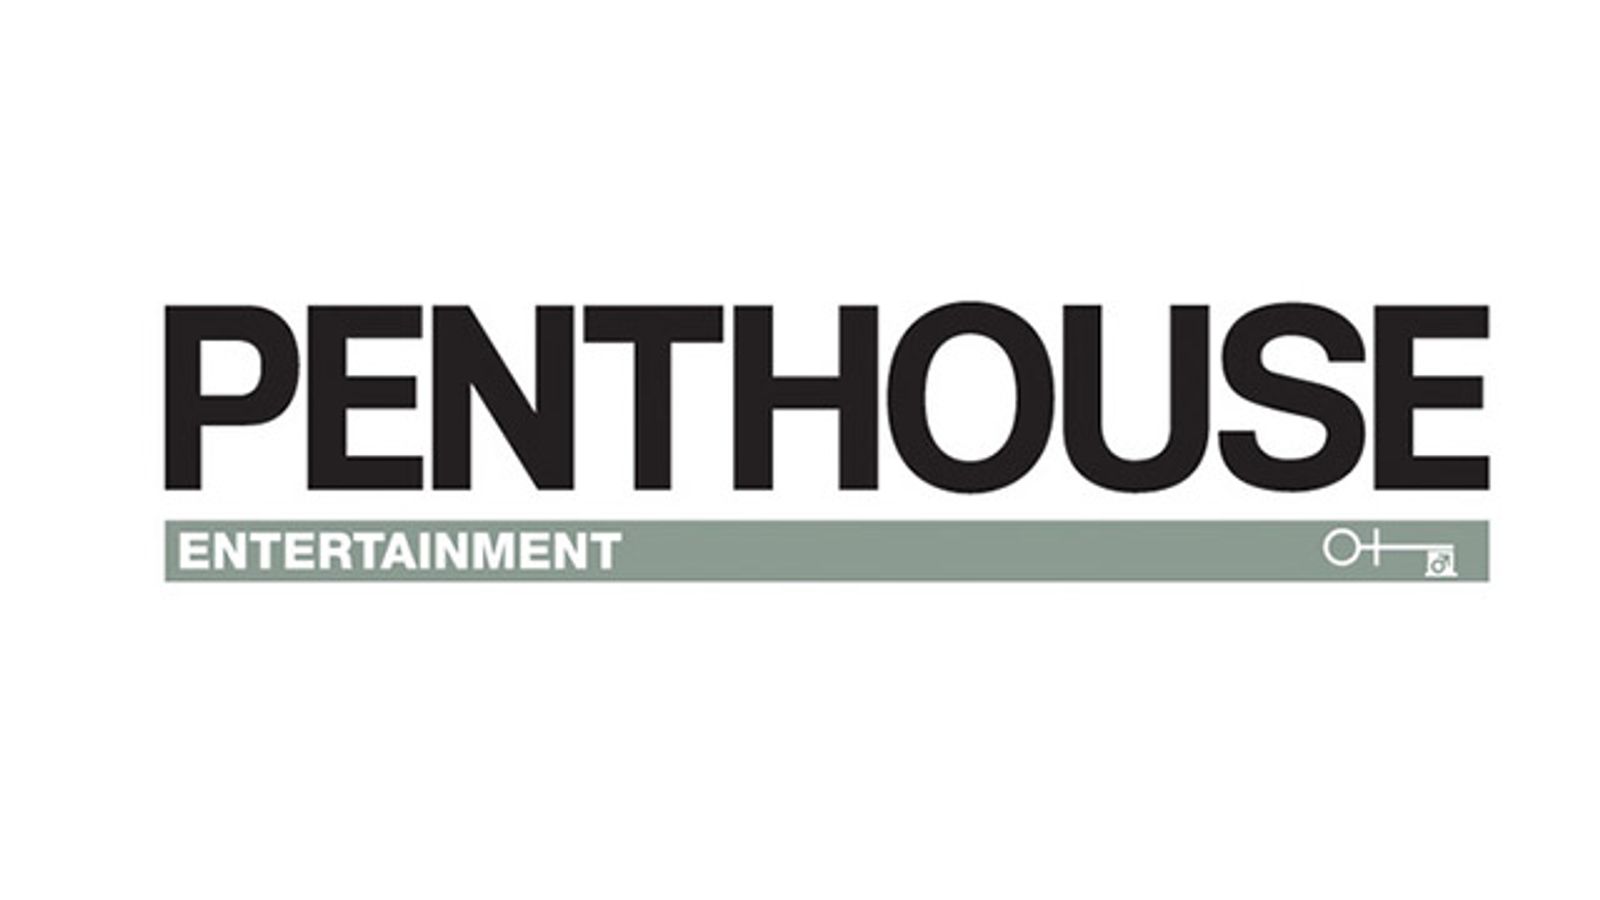 Penthouse Debuts 3 New Branded Websites For Its 50th Anniversary